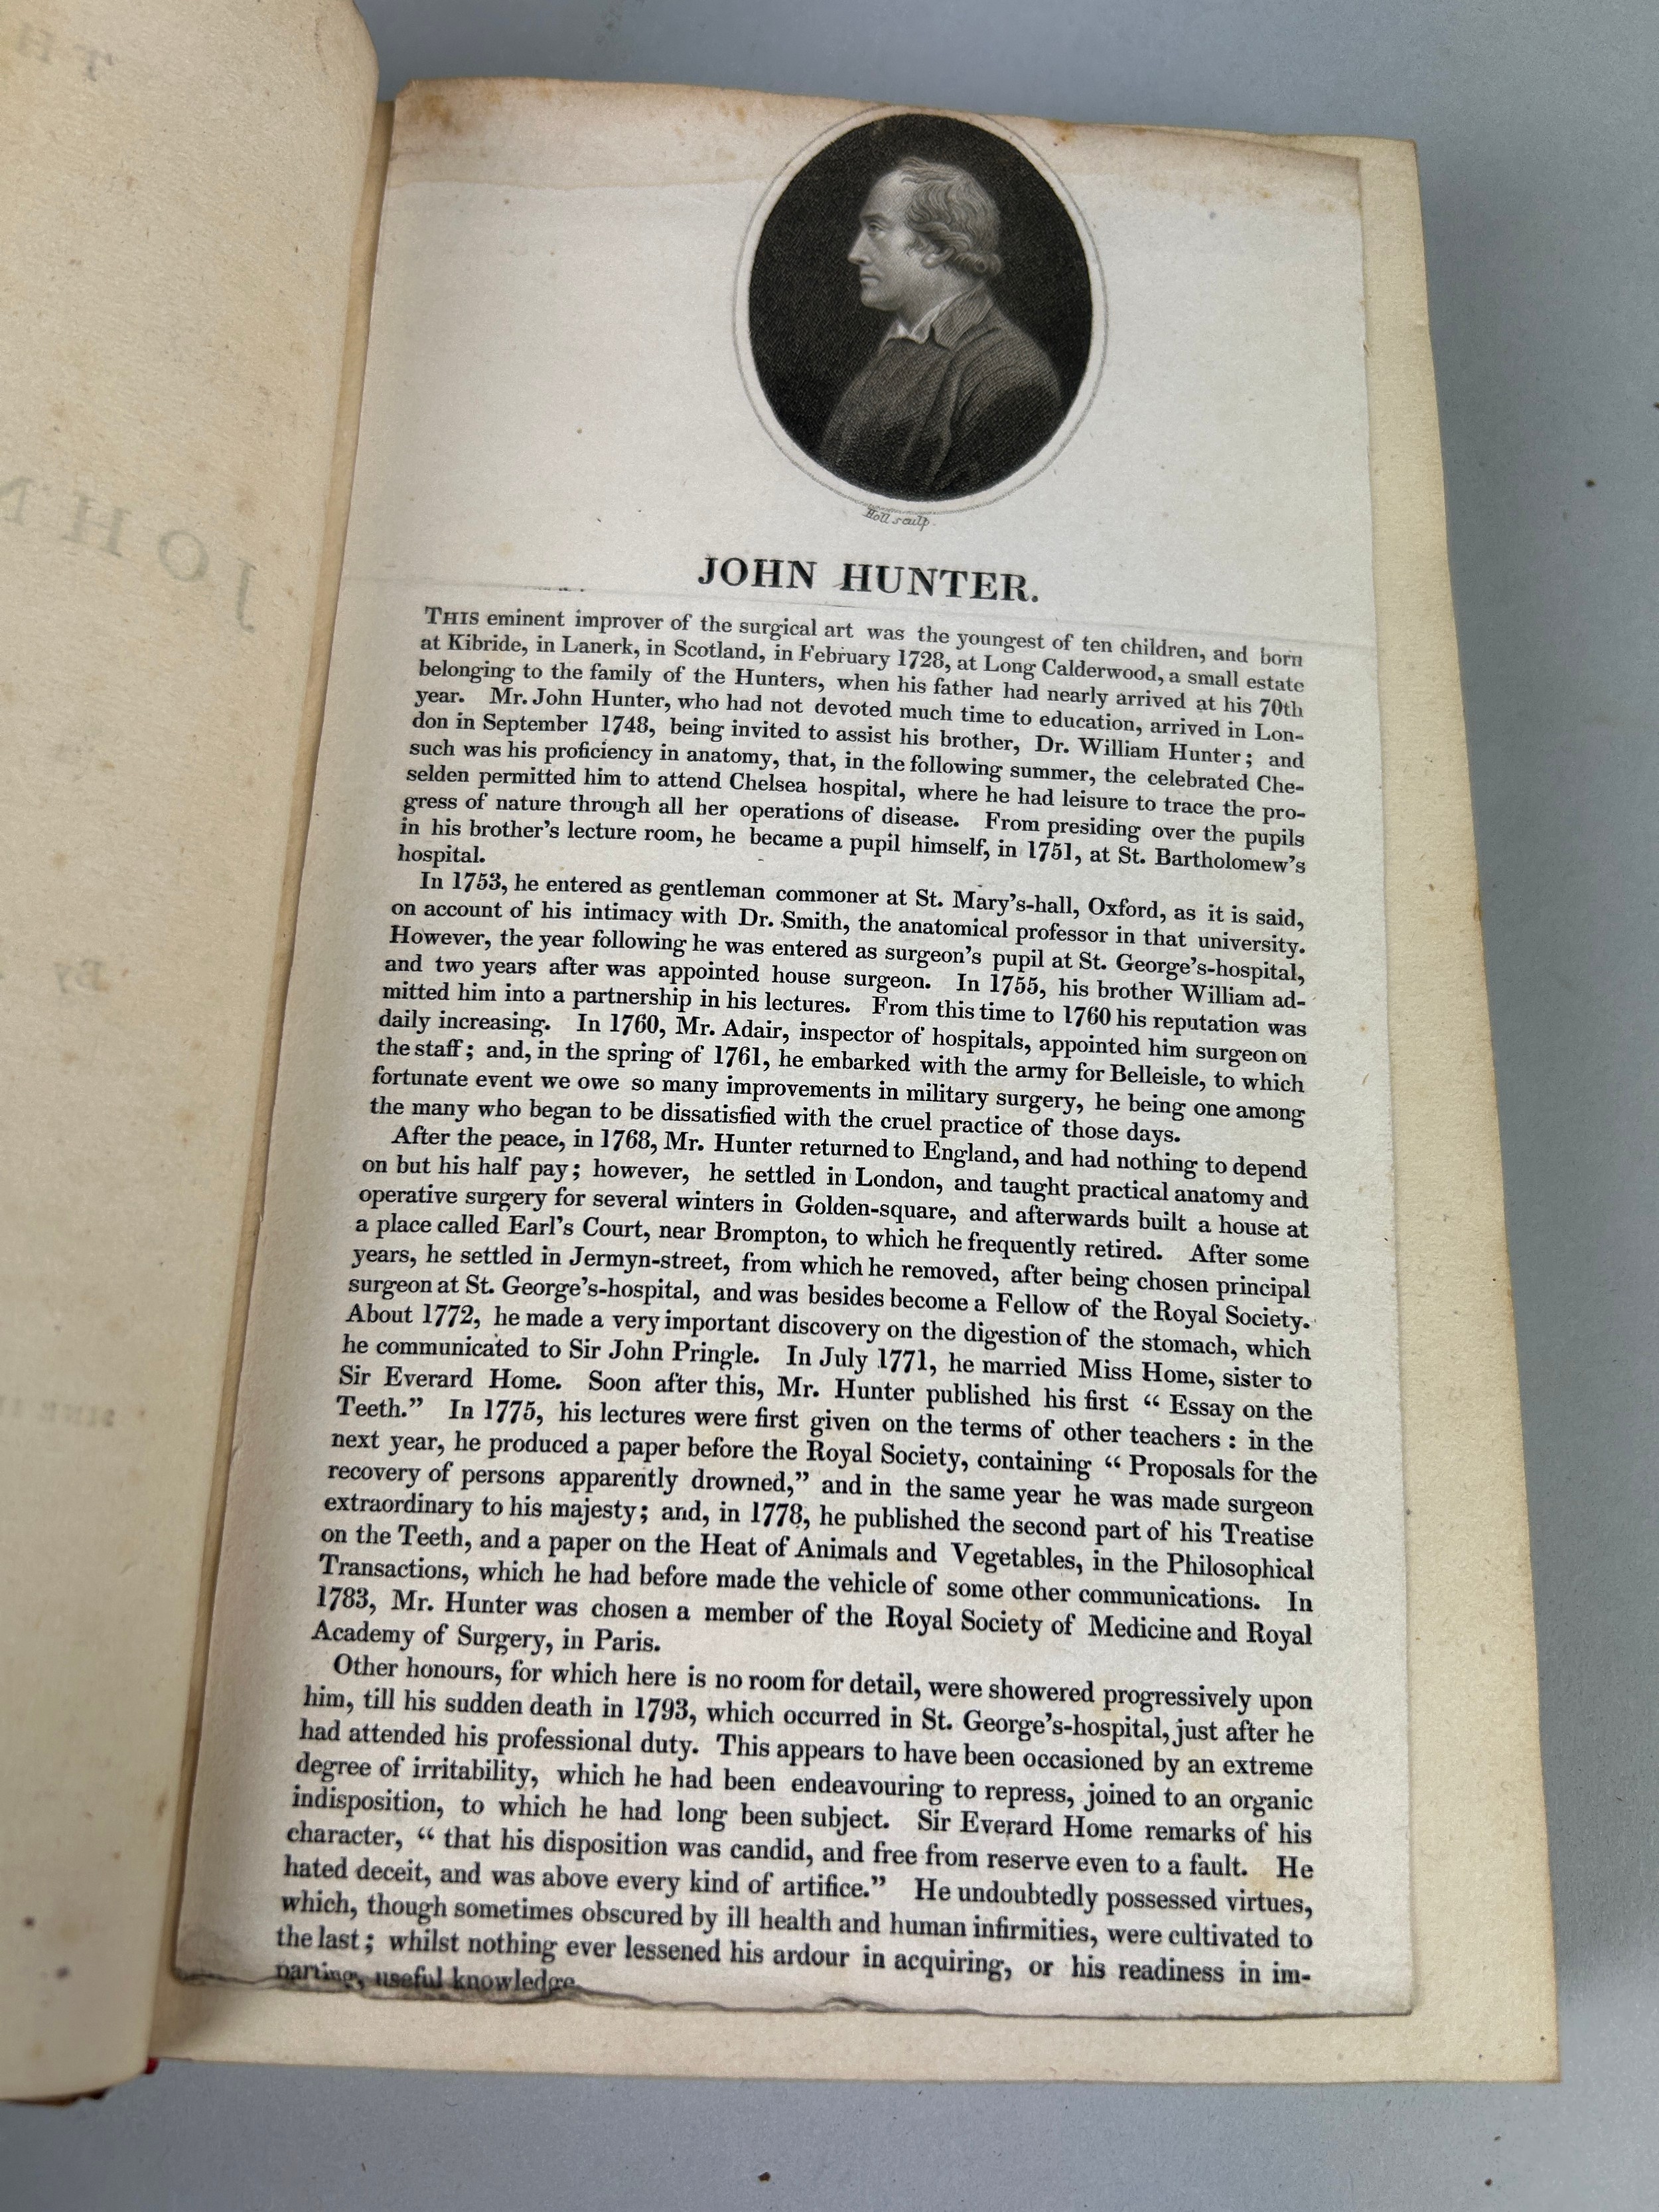 THE LIFE OF JOHN HUNTER, JESSE FOOT (SURGEON) LONDON, T.BECKET, PALL MALL, FIRST EDITION 1794, - Image 5 of 12